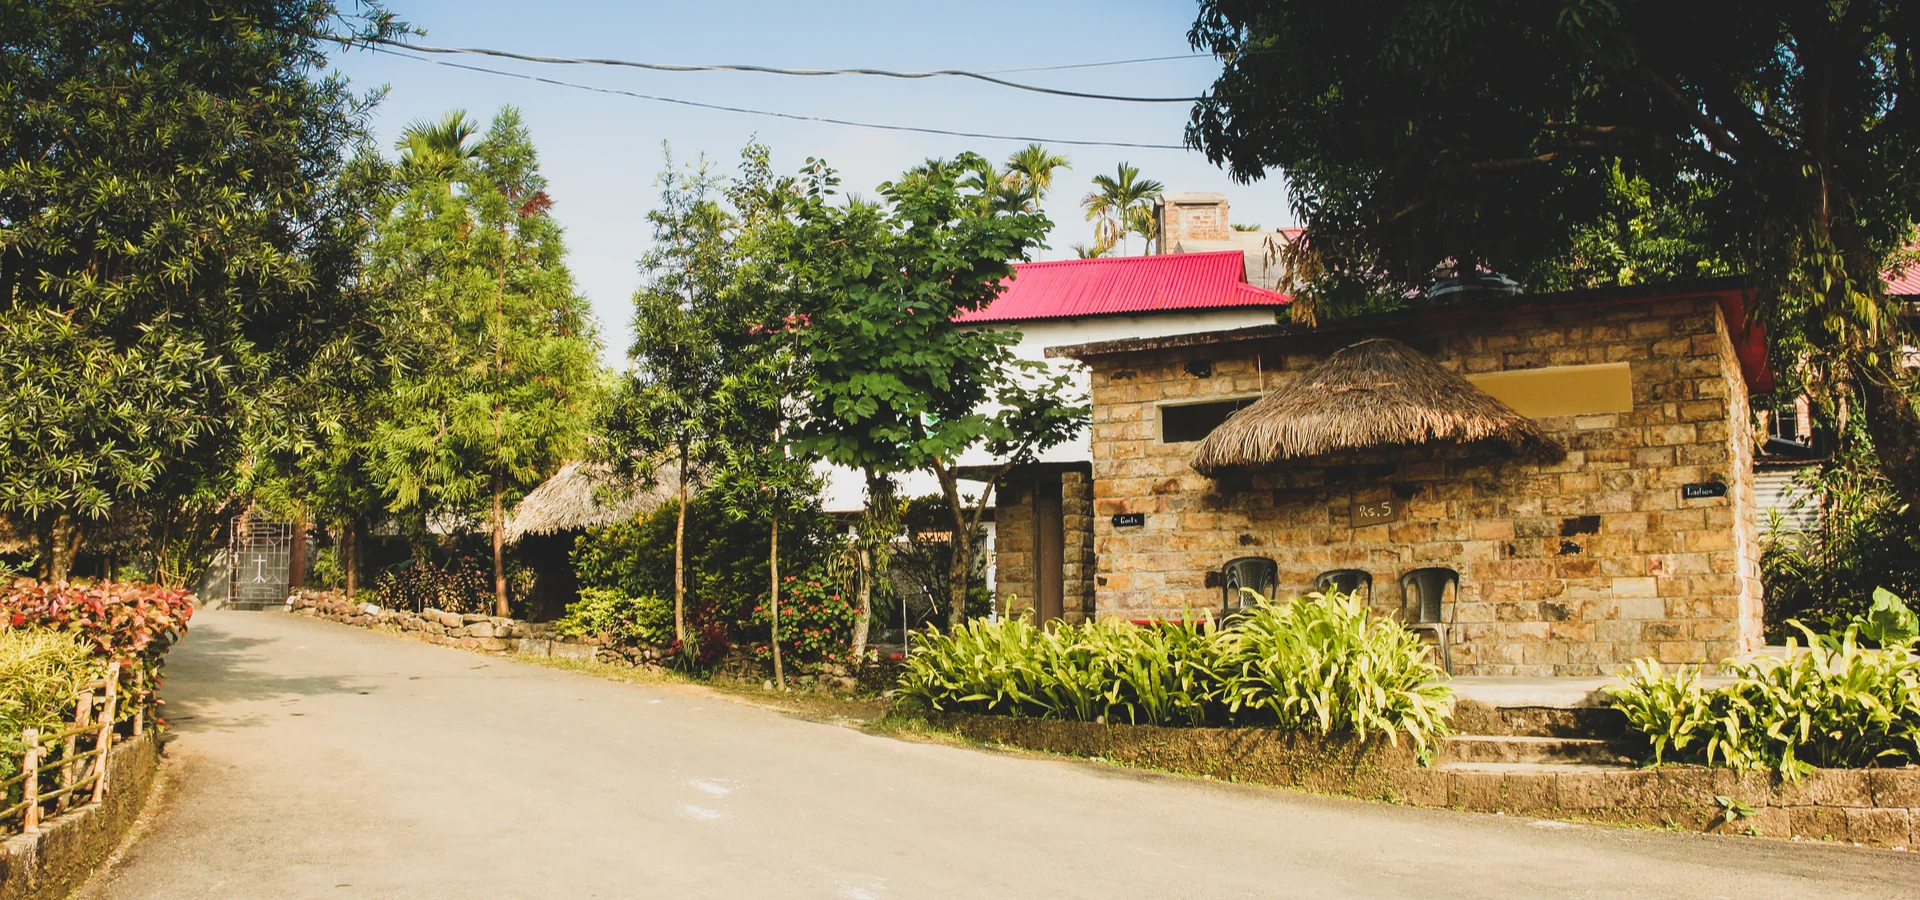 Mawlynnong, the cleanest village